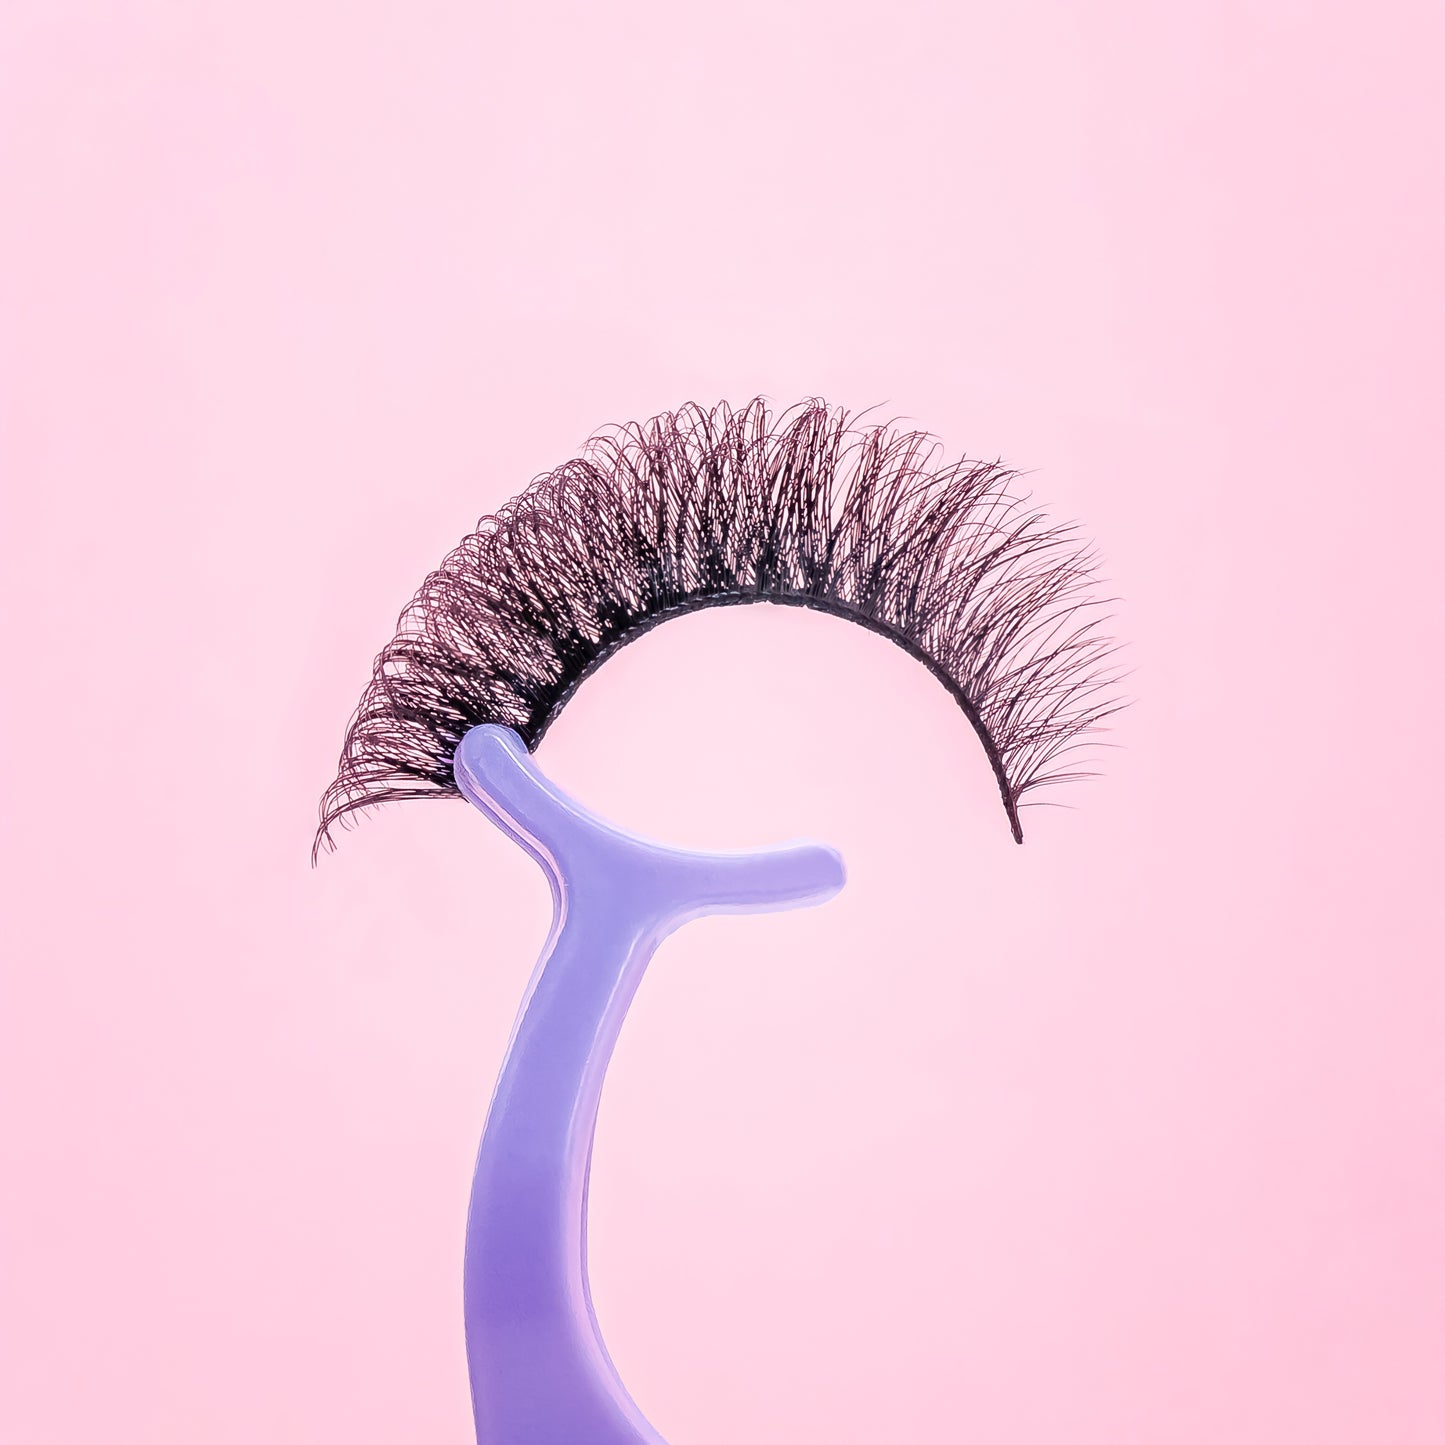 Long and wispy d curl russian style strip false eyelashes.